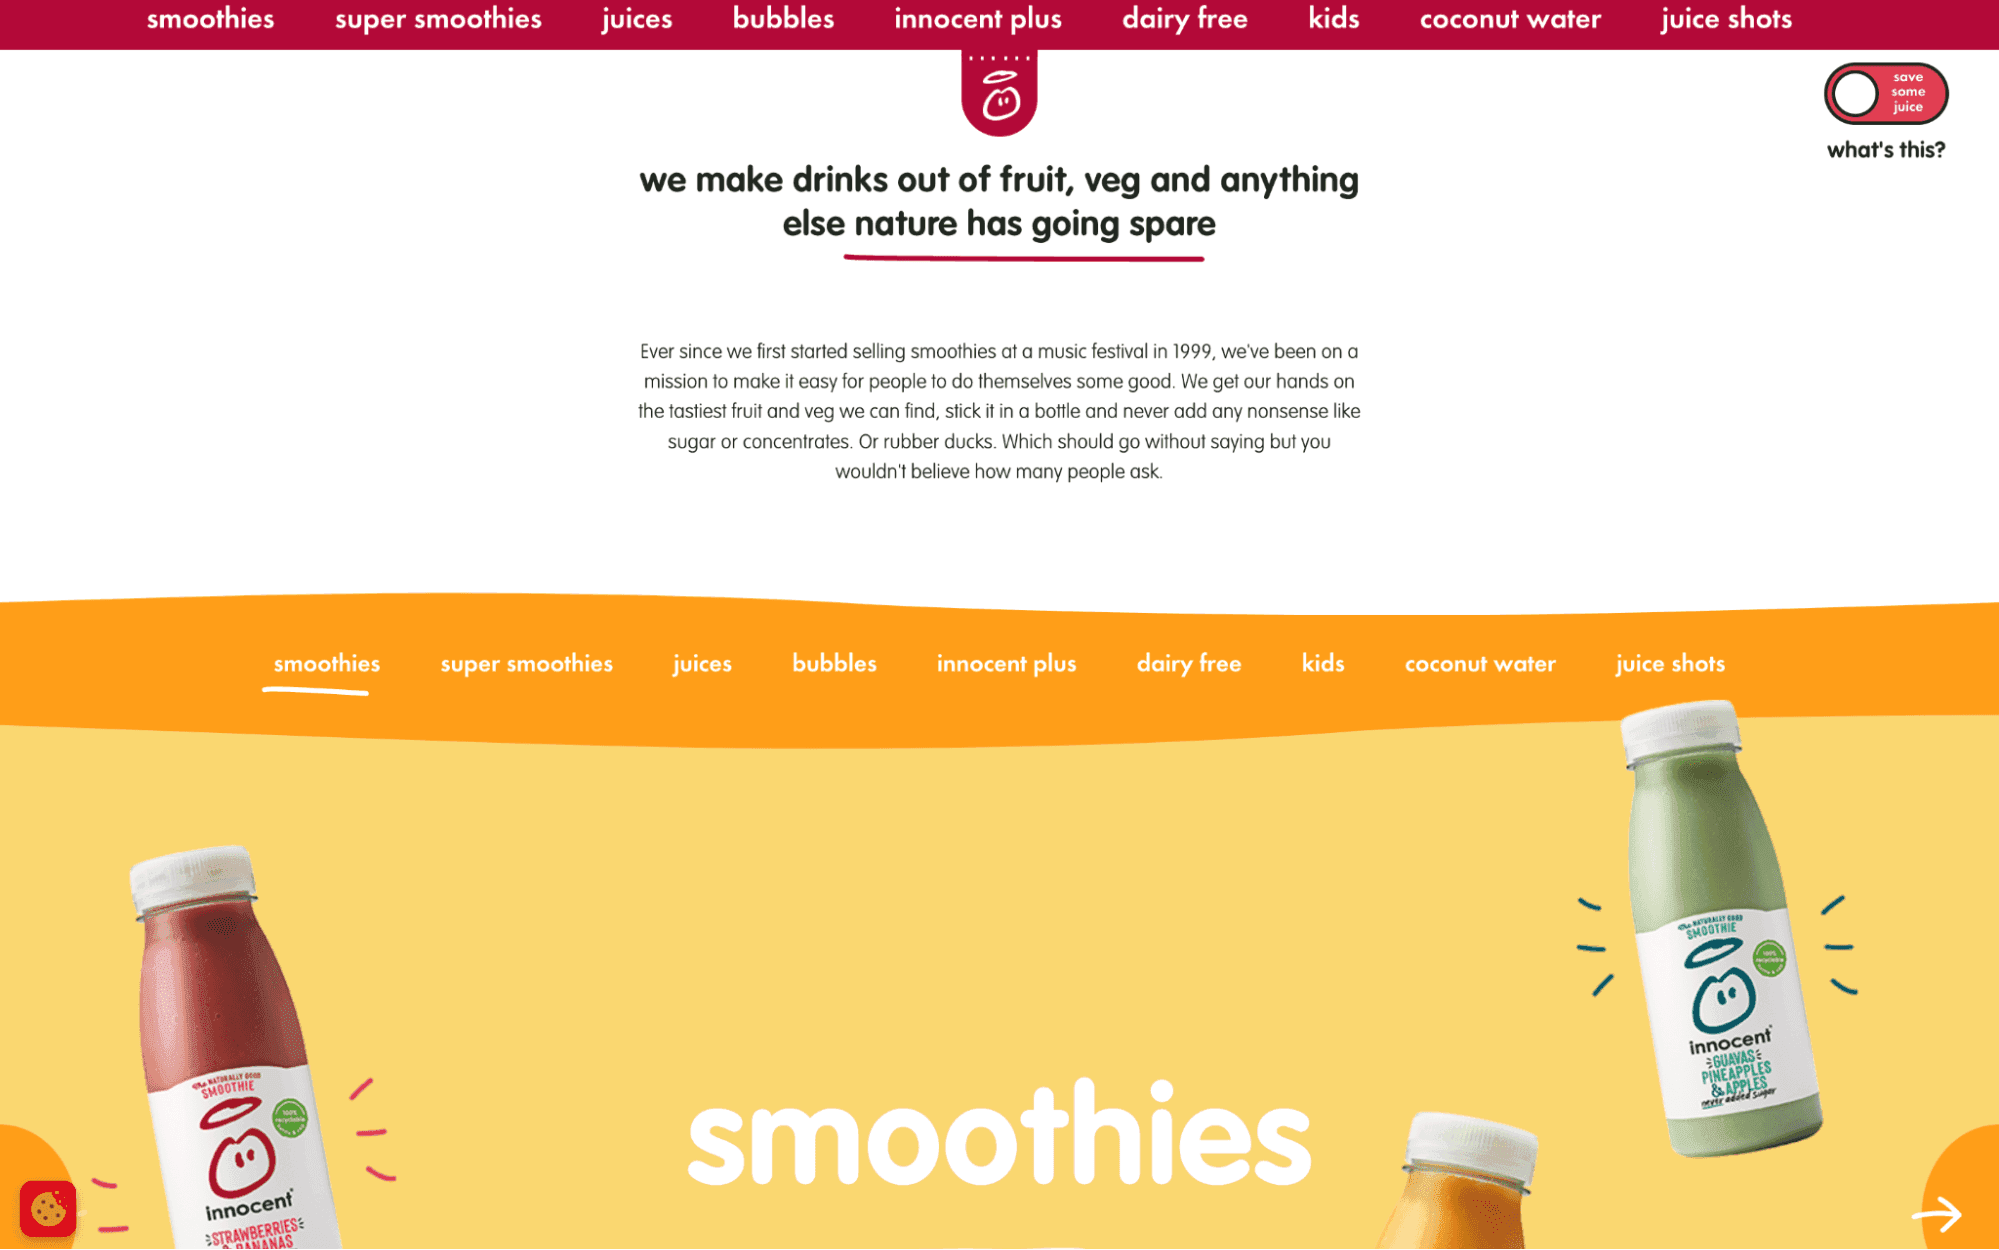 colorful, playful website home page advertising smoothies from the brand 'Innocent'